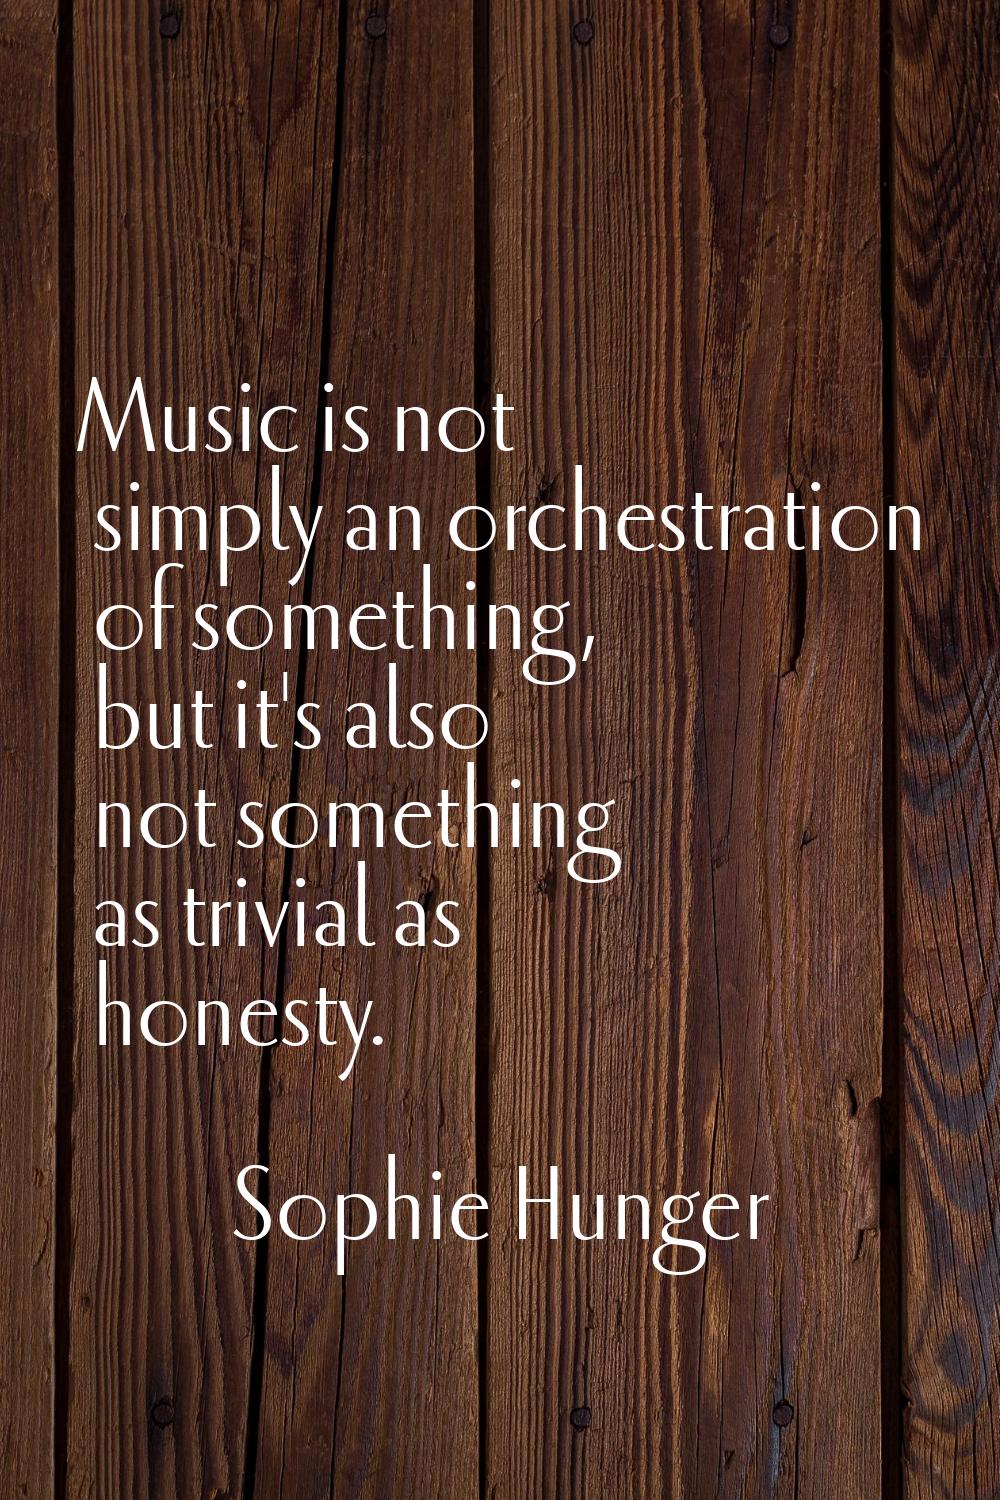 Music is not simply an orchestration of something, but it's also not something as trivial as honest